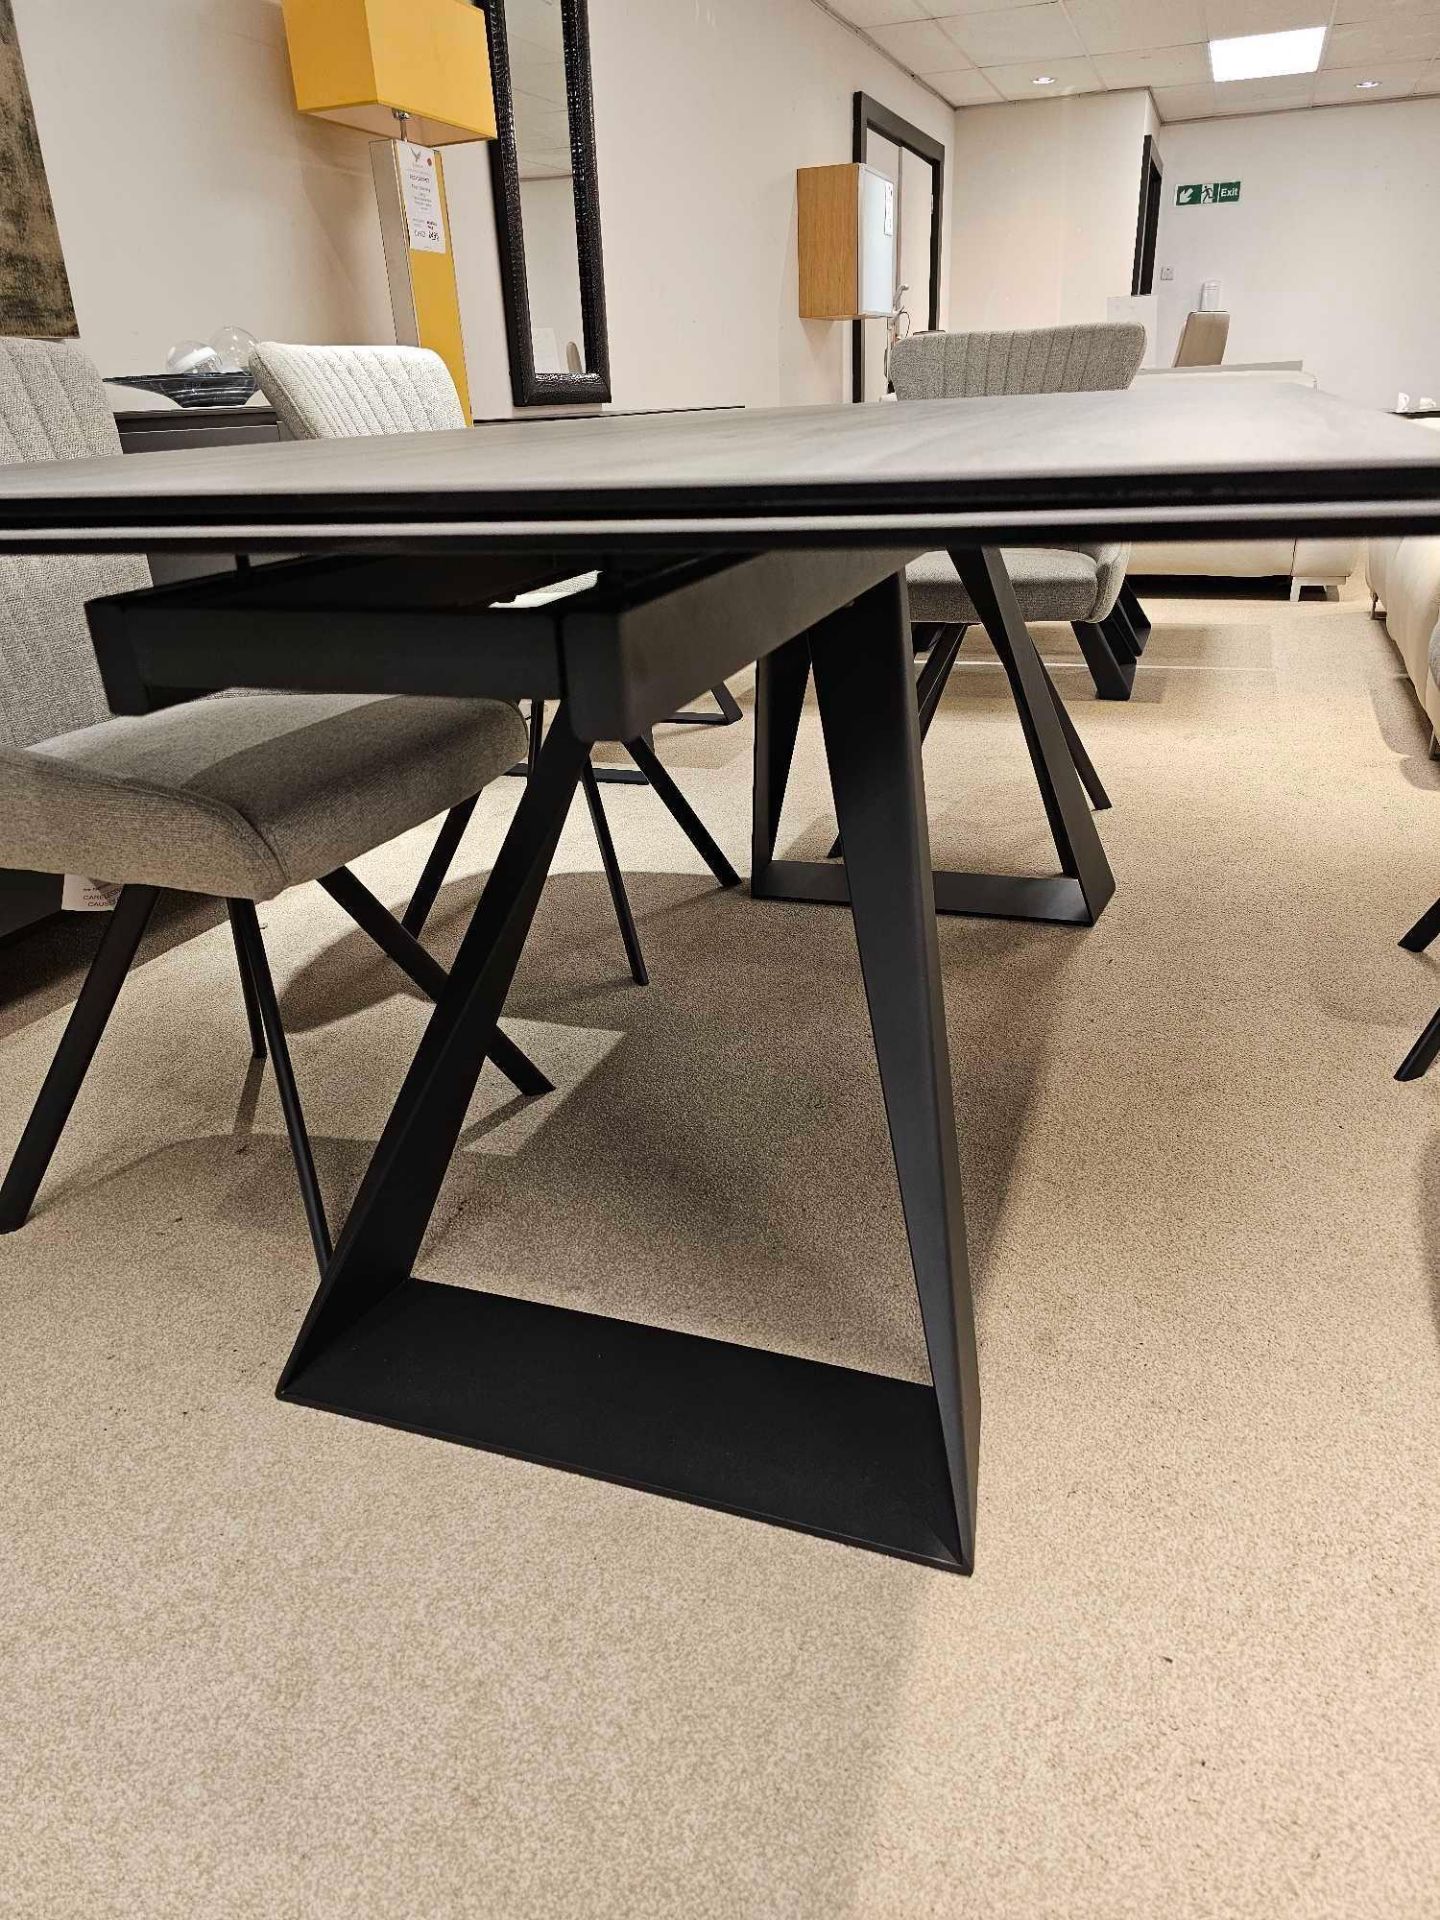 Spartan Dining Table by Kesterport The Spartan Dining Table is part of a sophisticated collection of - Bild 8 aus 12